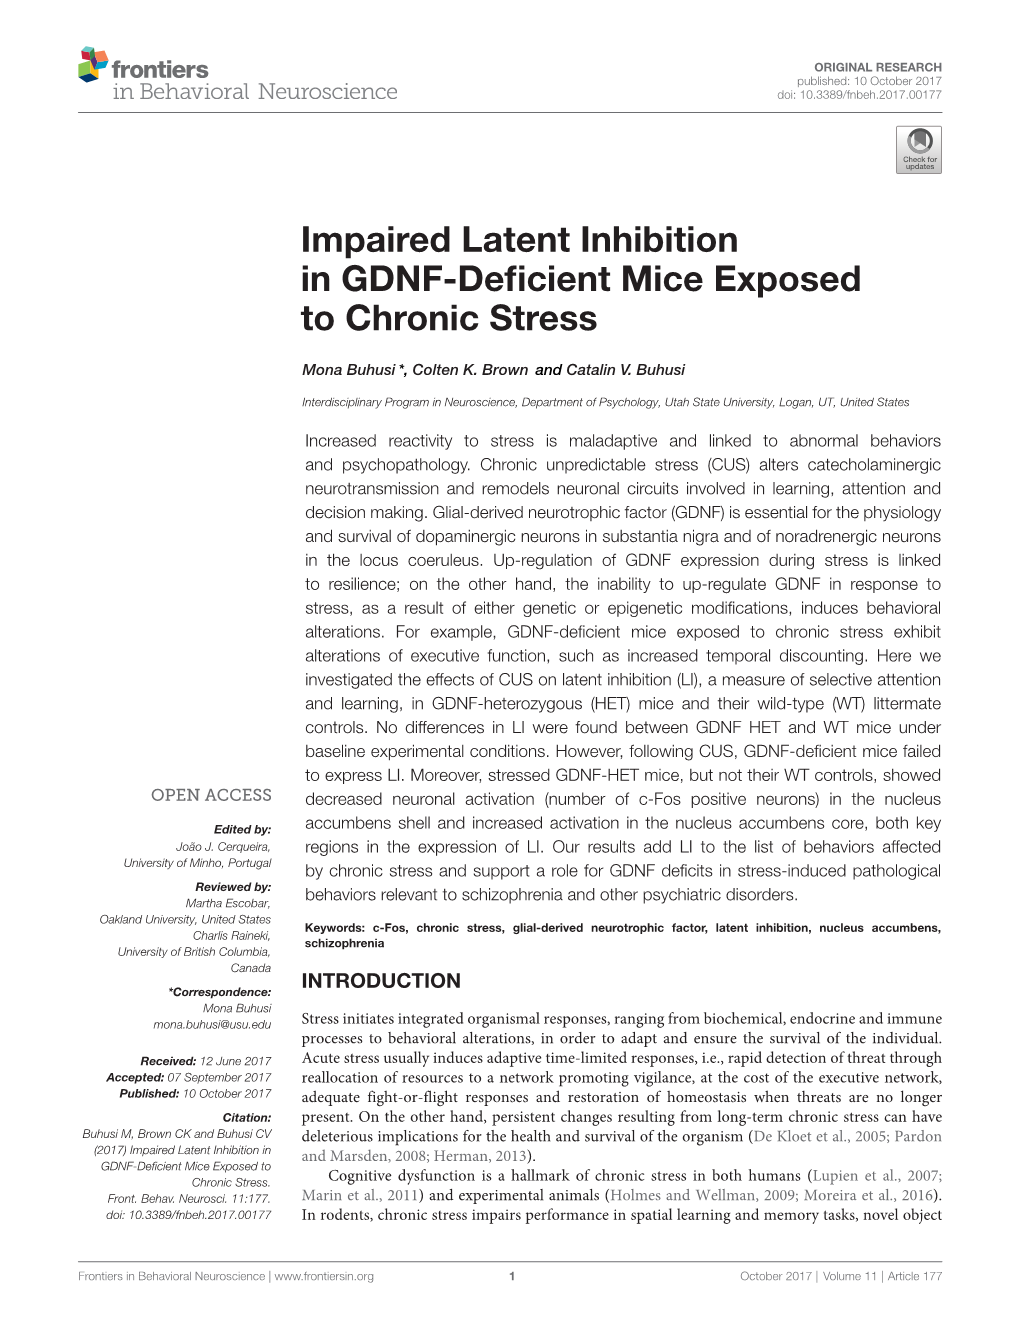 Impaired Latent Inhibition in GDNF-Deficient Mice Exposed To